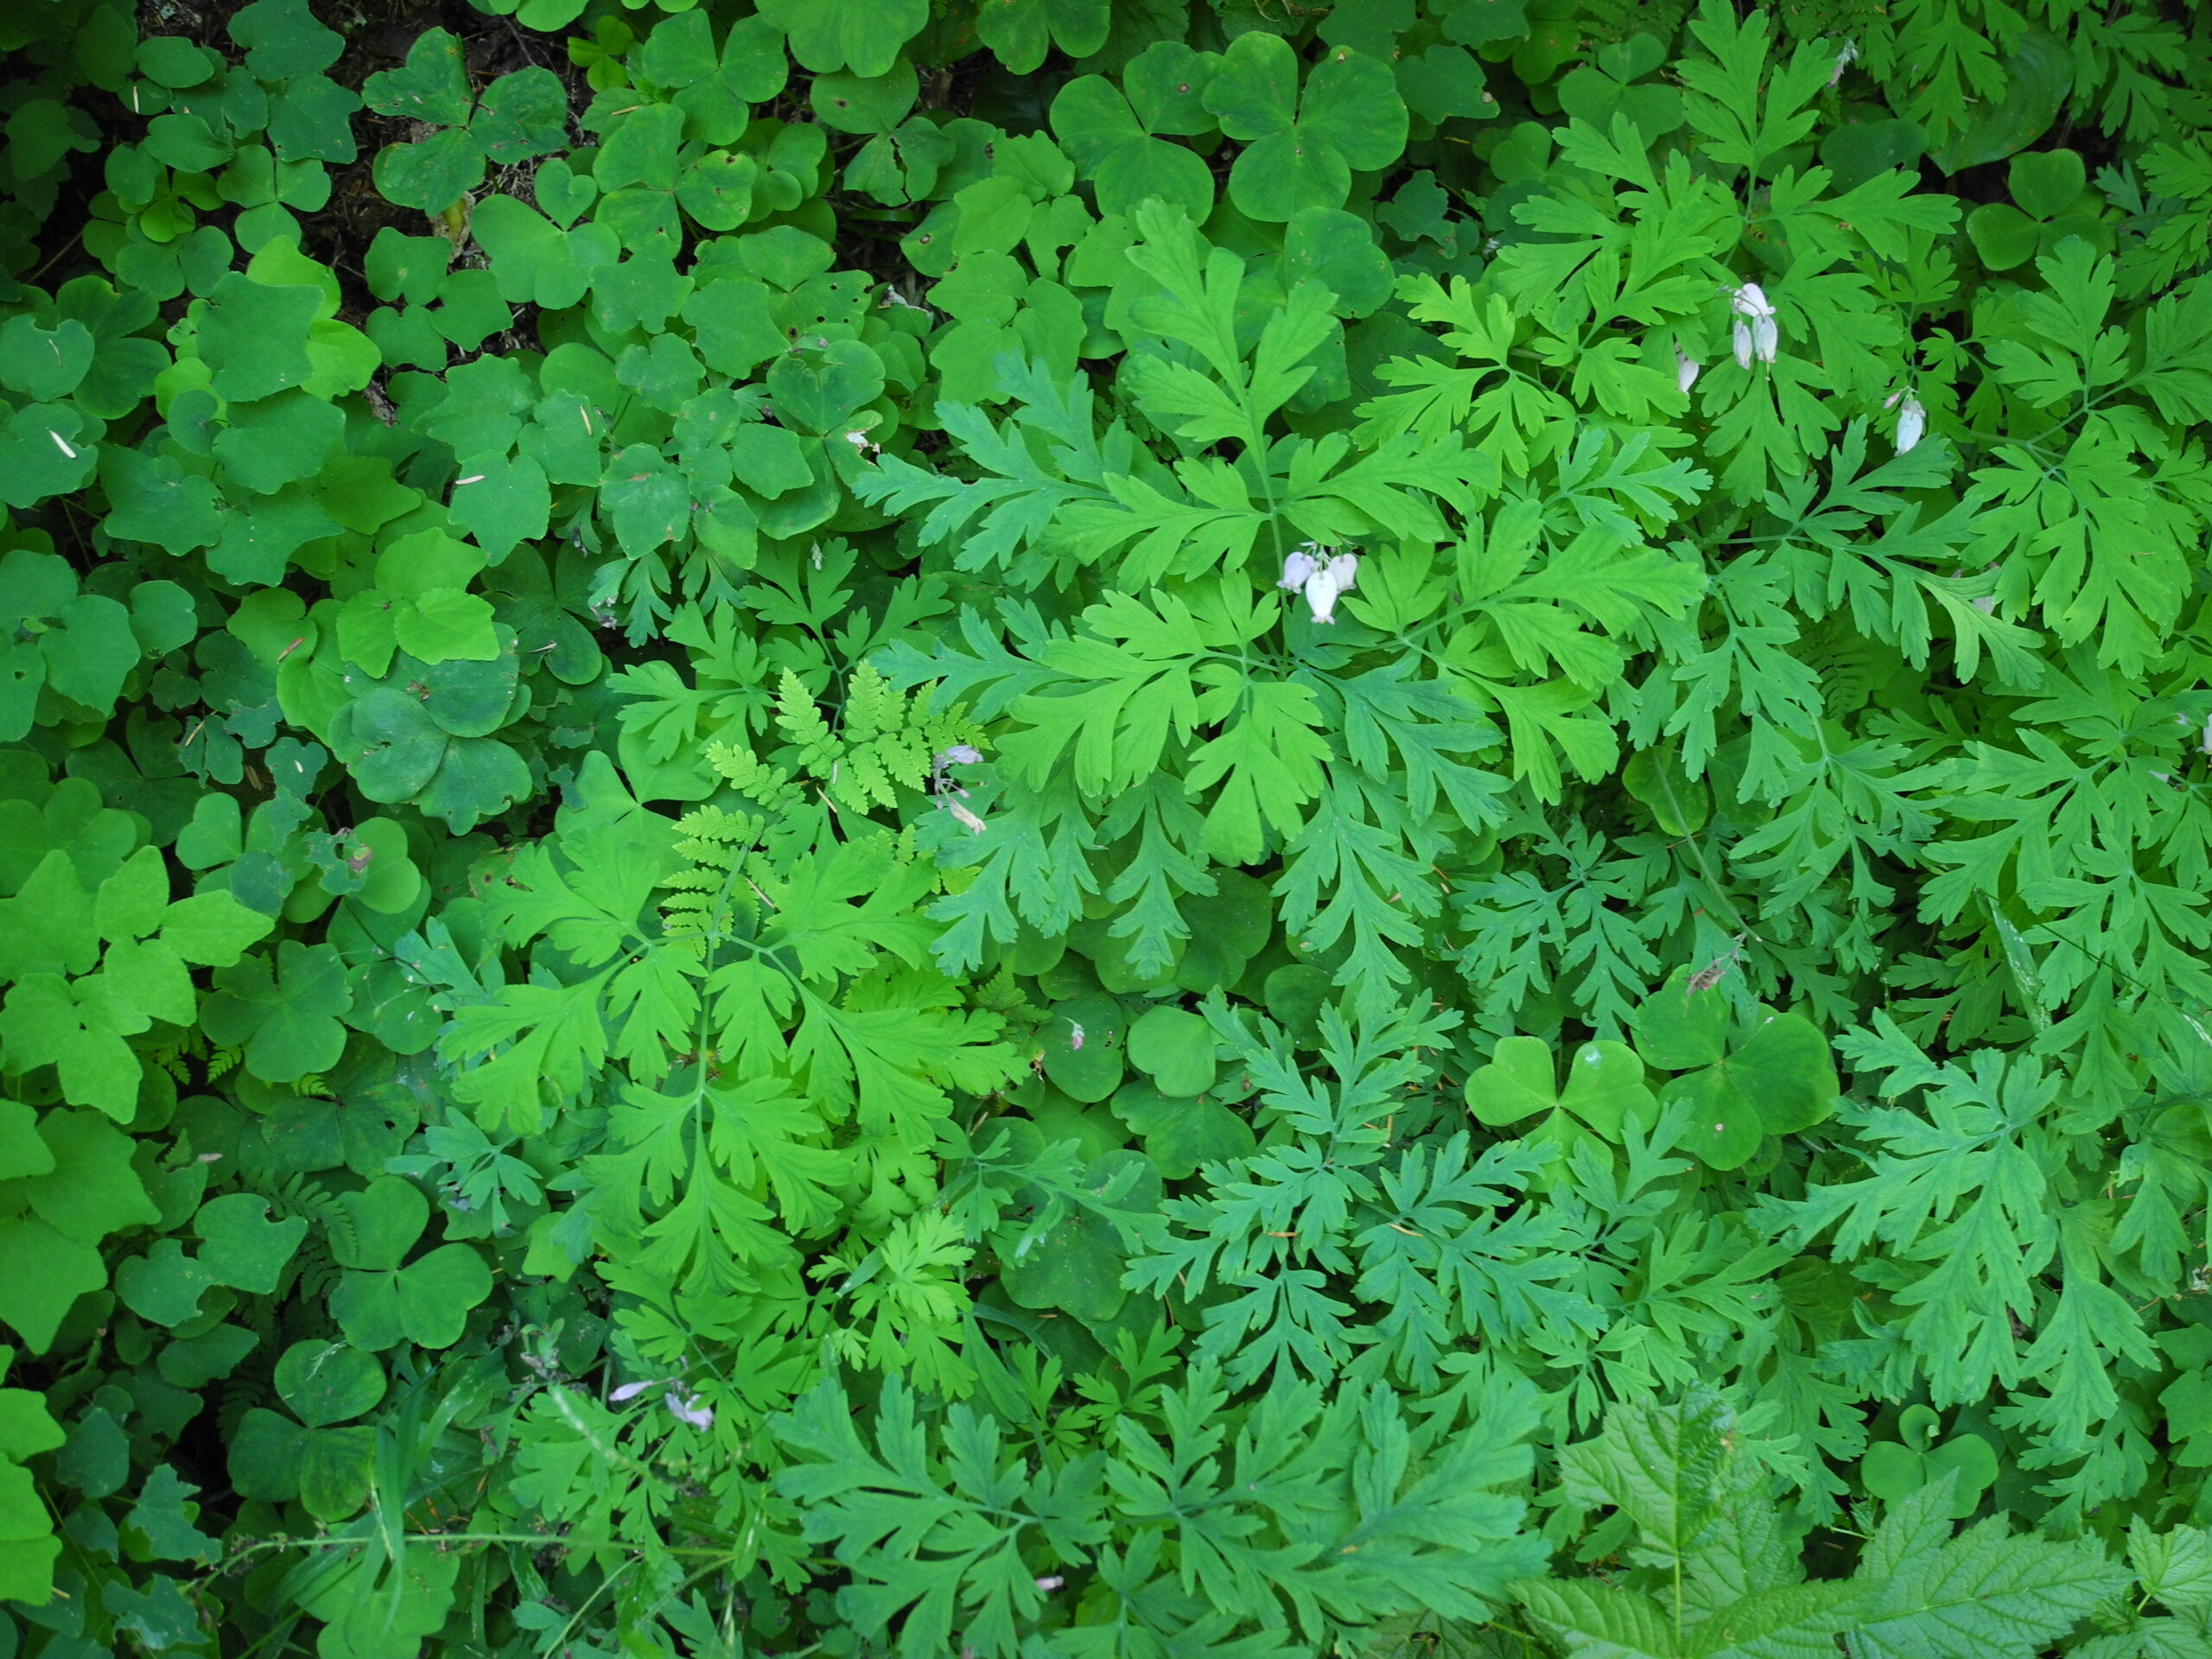 Color photo of a forest floor in summer, bright green, showing bleeding heart flower, fern, duckfoot, and oxalis,